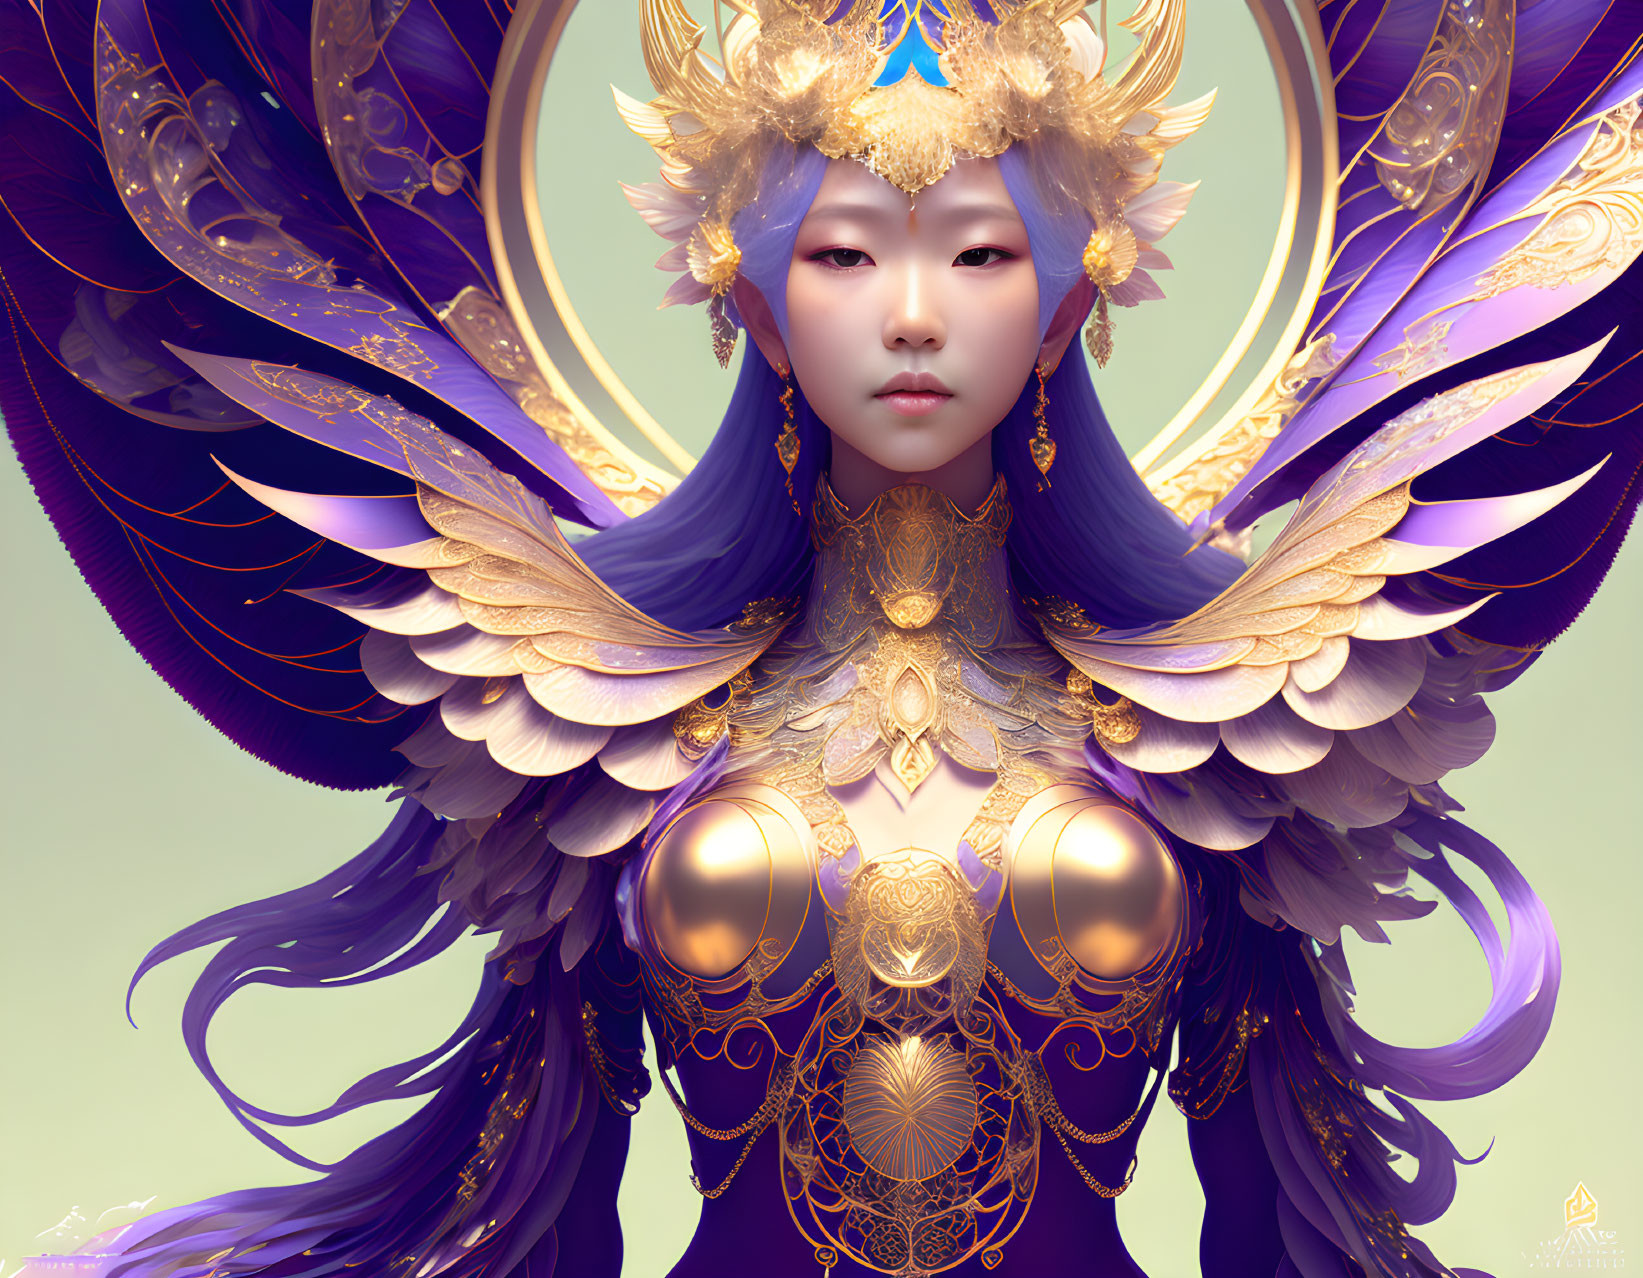 Regal fantasy figure in golden armor with blue face and purple hair